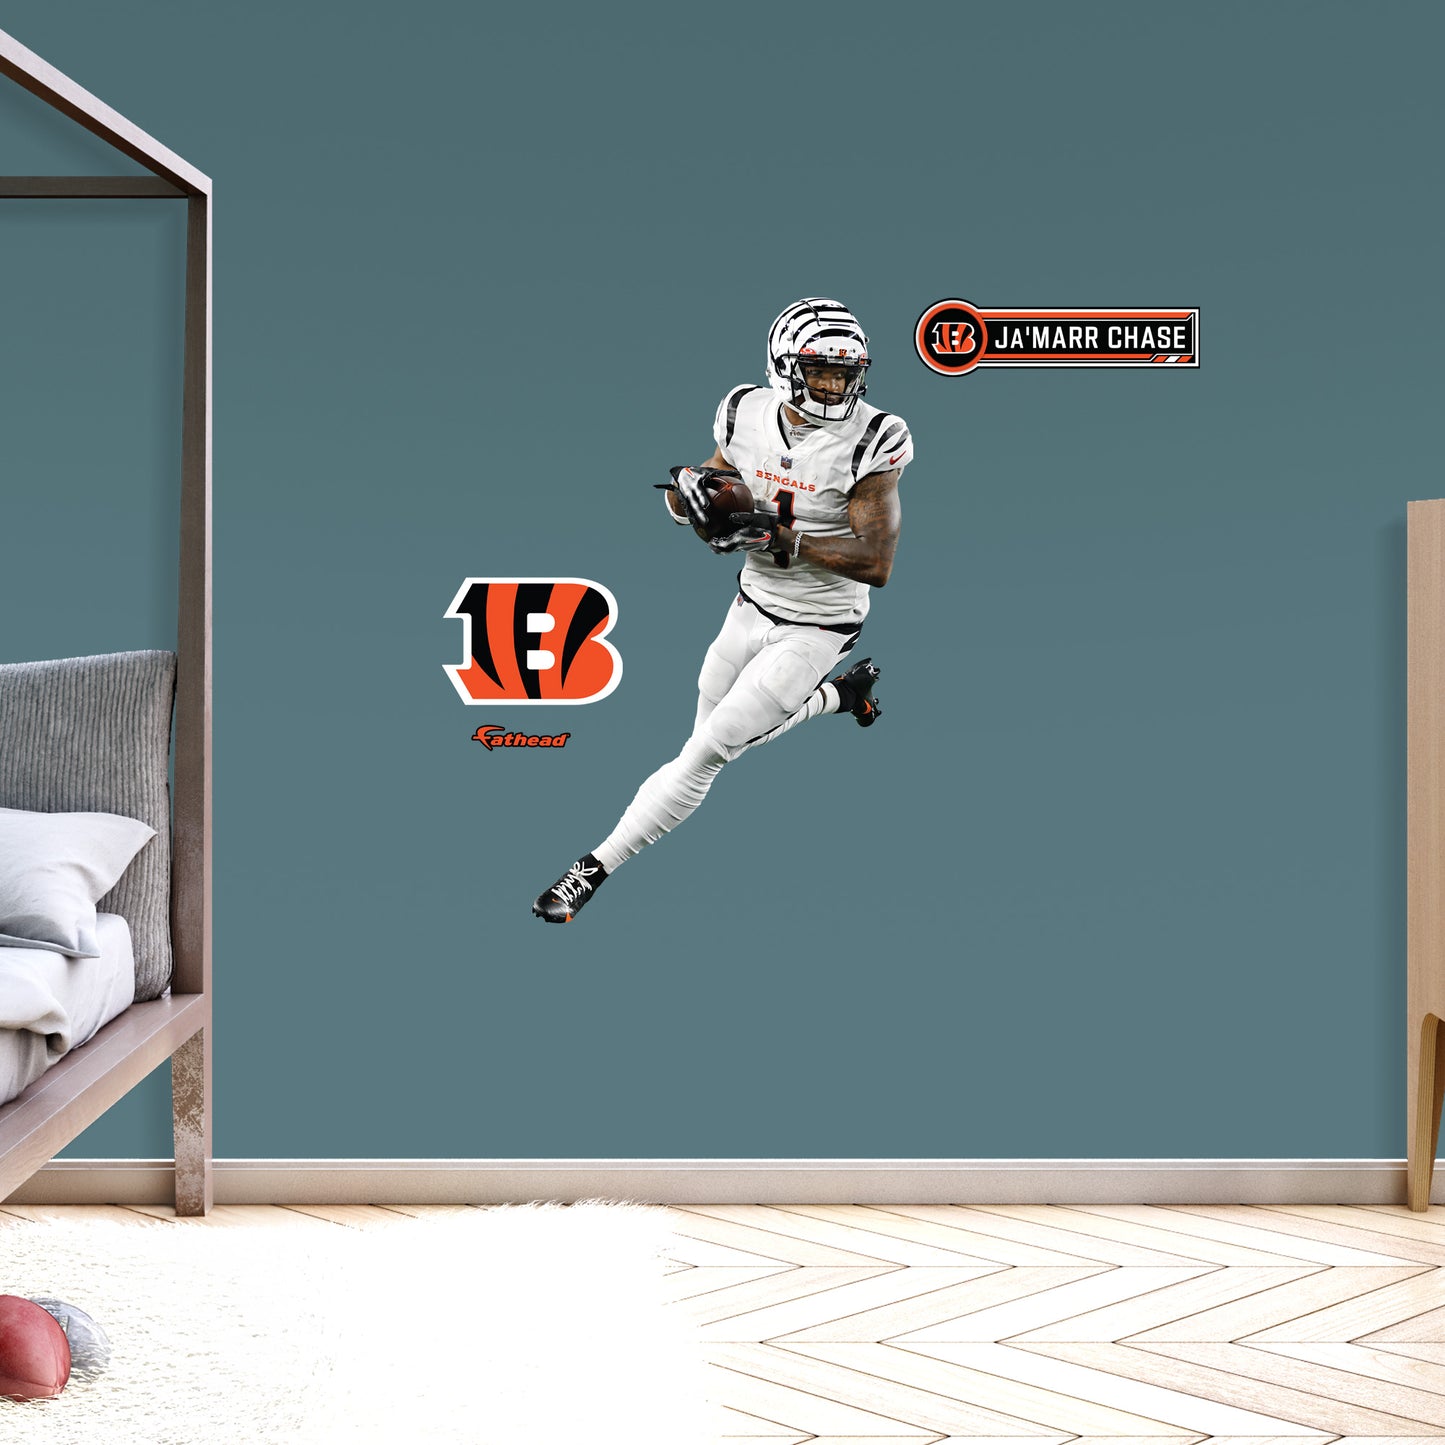 Cincinnati Bengals: Ja'Marr Chase White Uniform        - Officially Licensed NFL Removable     Adhesive Decal